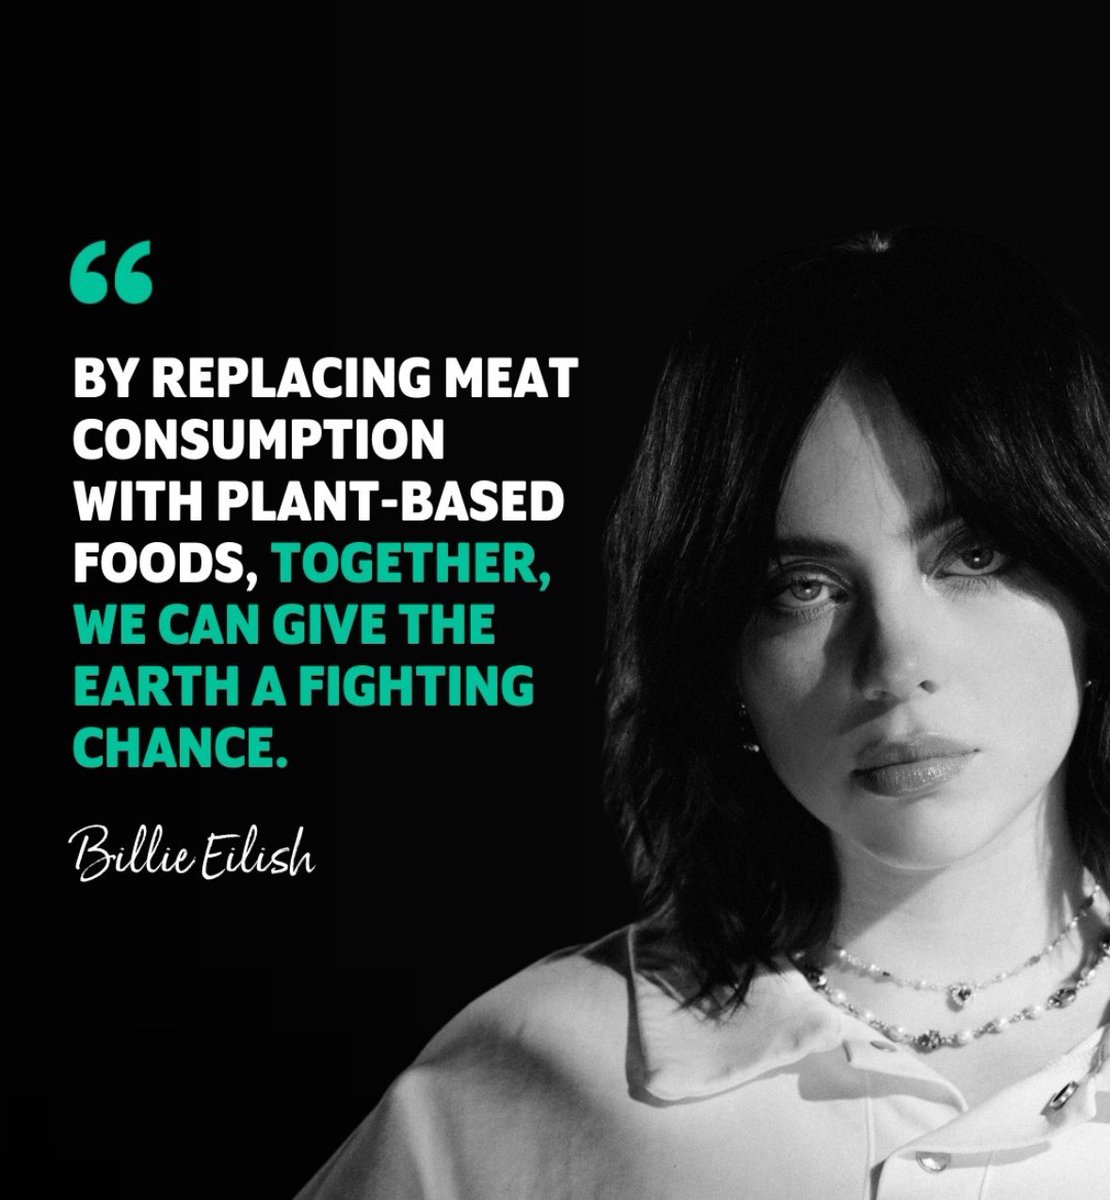 The livestock sector contributes more than 60% of all food-system greenhouse gasses. That's a lot of pressure on our planet. Start slow and reduce your meat intake, it’s good for you and ultimately for the planet. #ClimateAction #BillieEilish